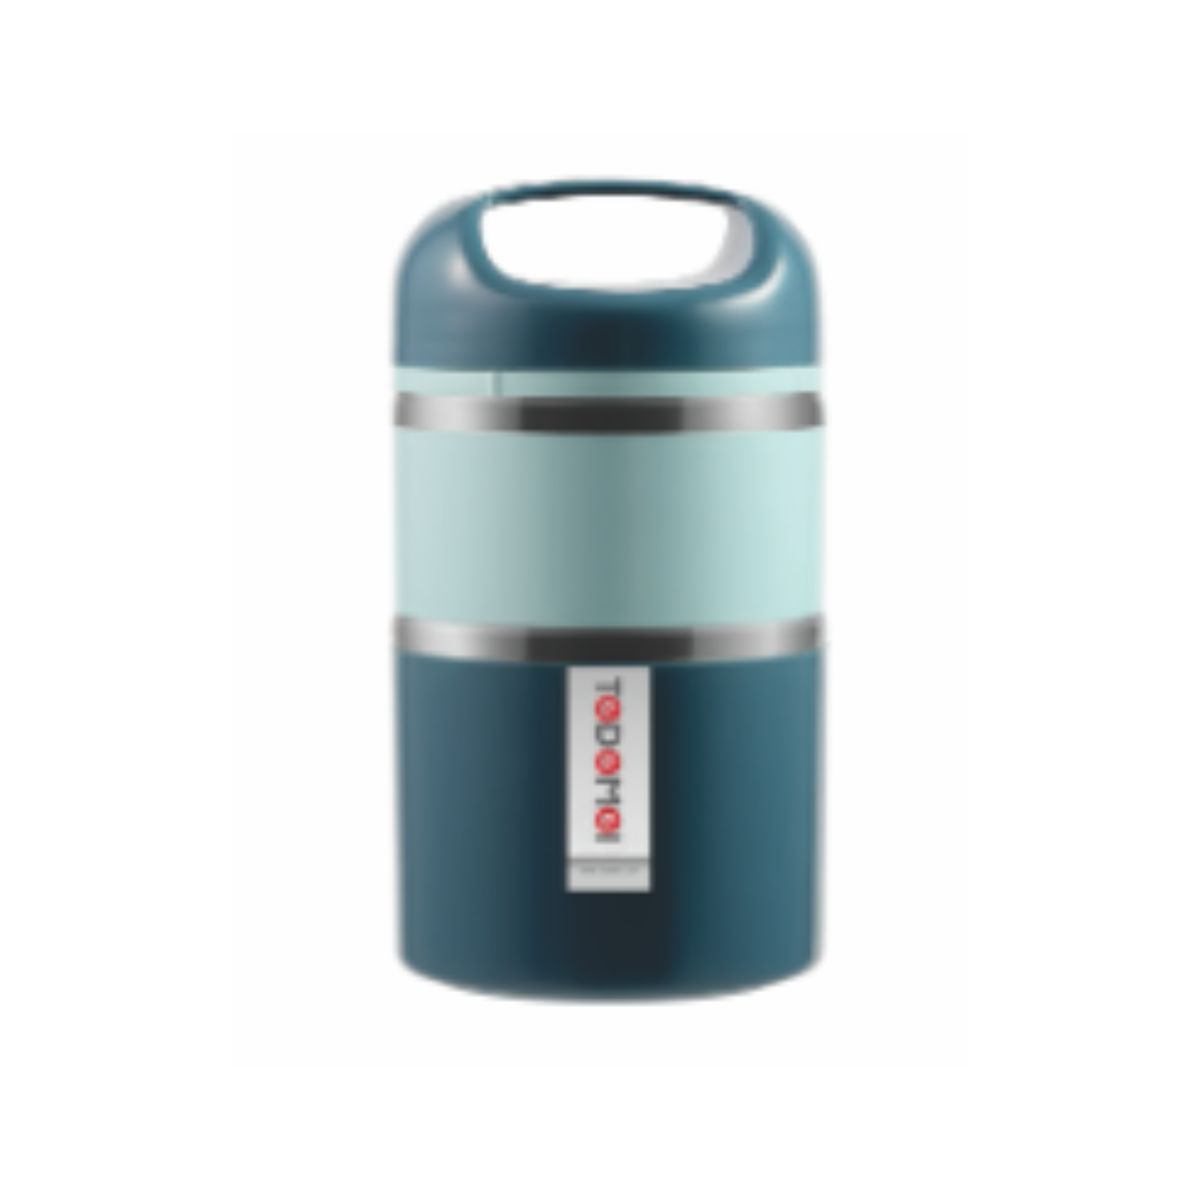 Tedemei Lunch Box - Double Layer  - 1.13L - Blue